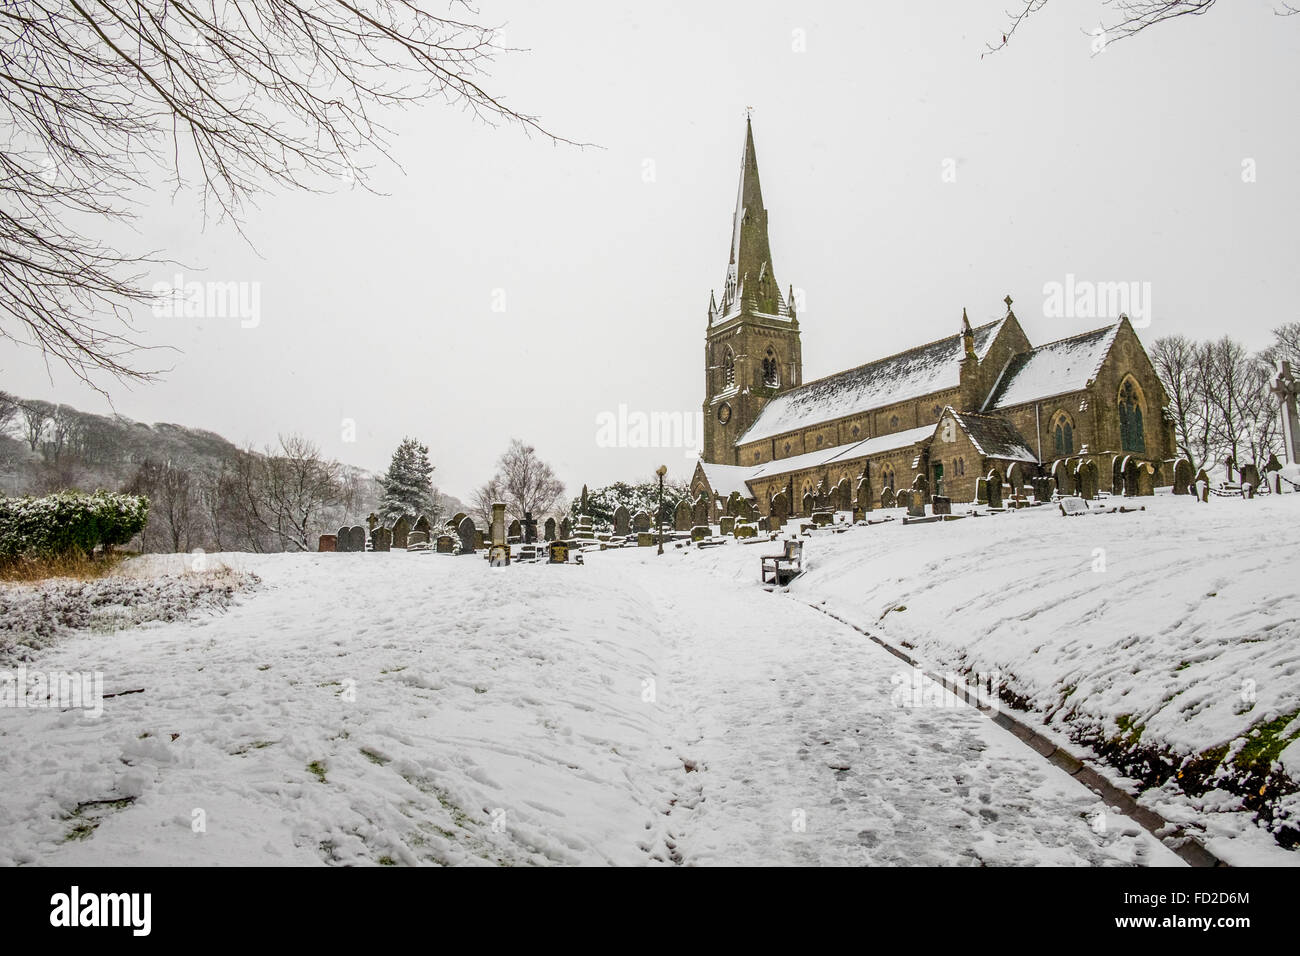 Going up the path leading up to a church with a snow covering the path and church in the distance Stock Photo